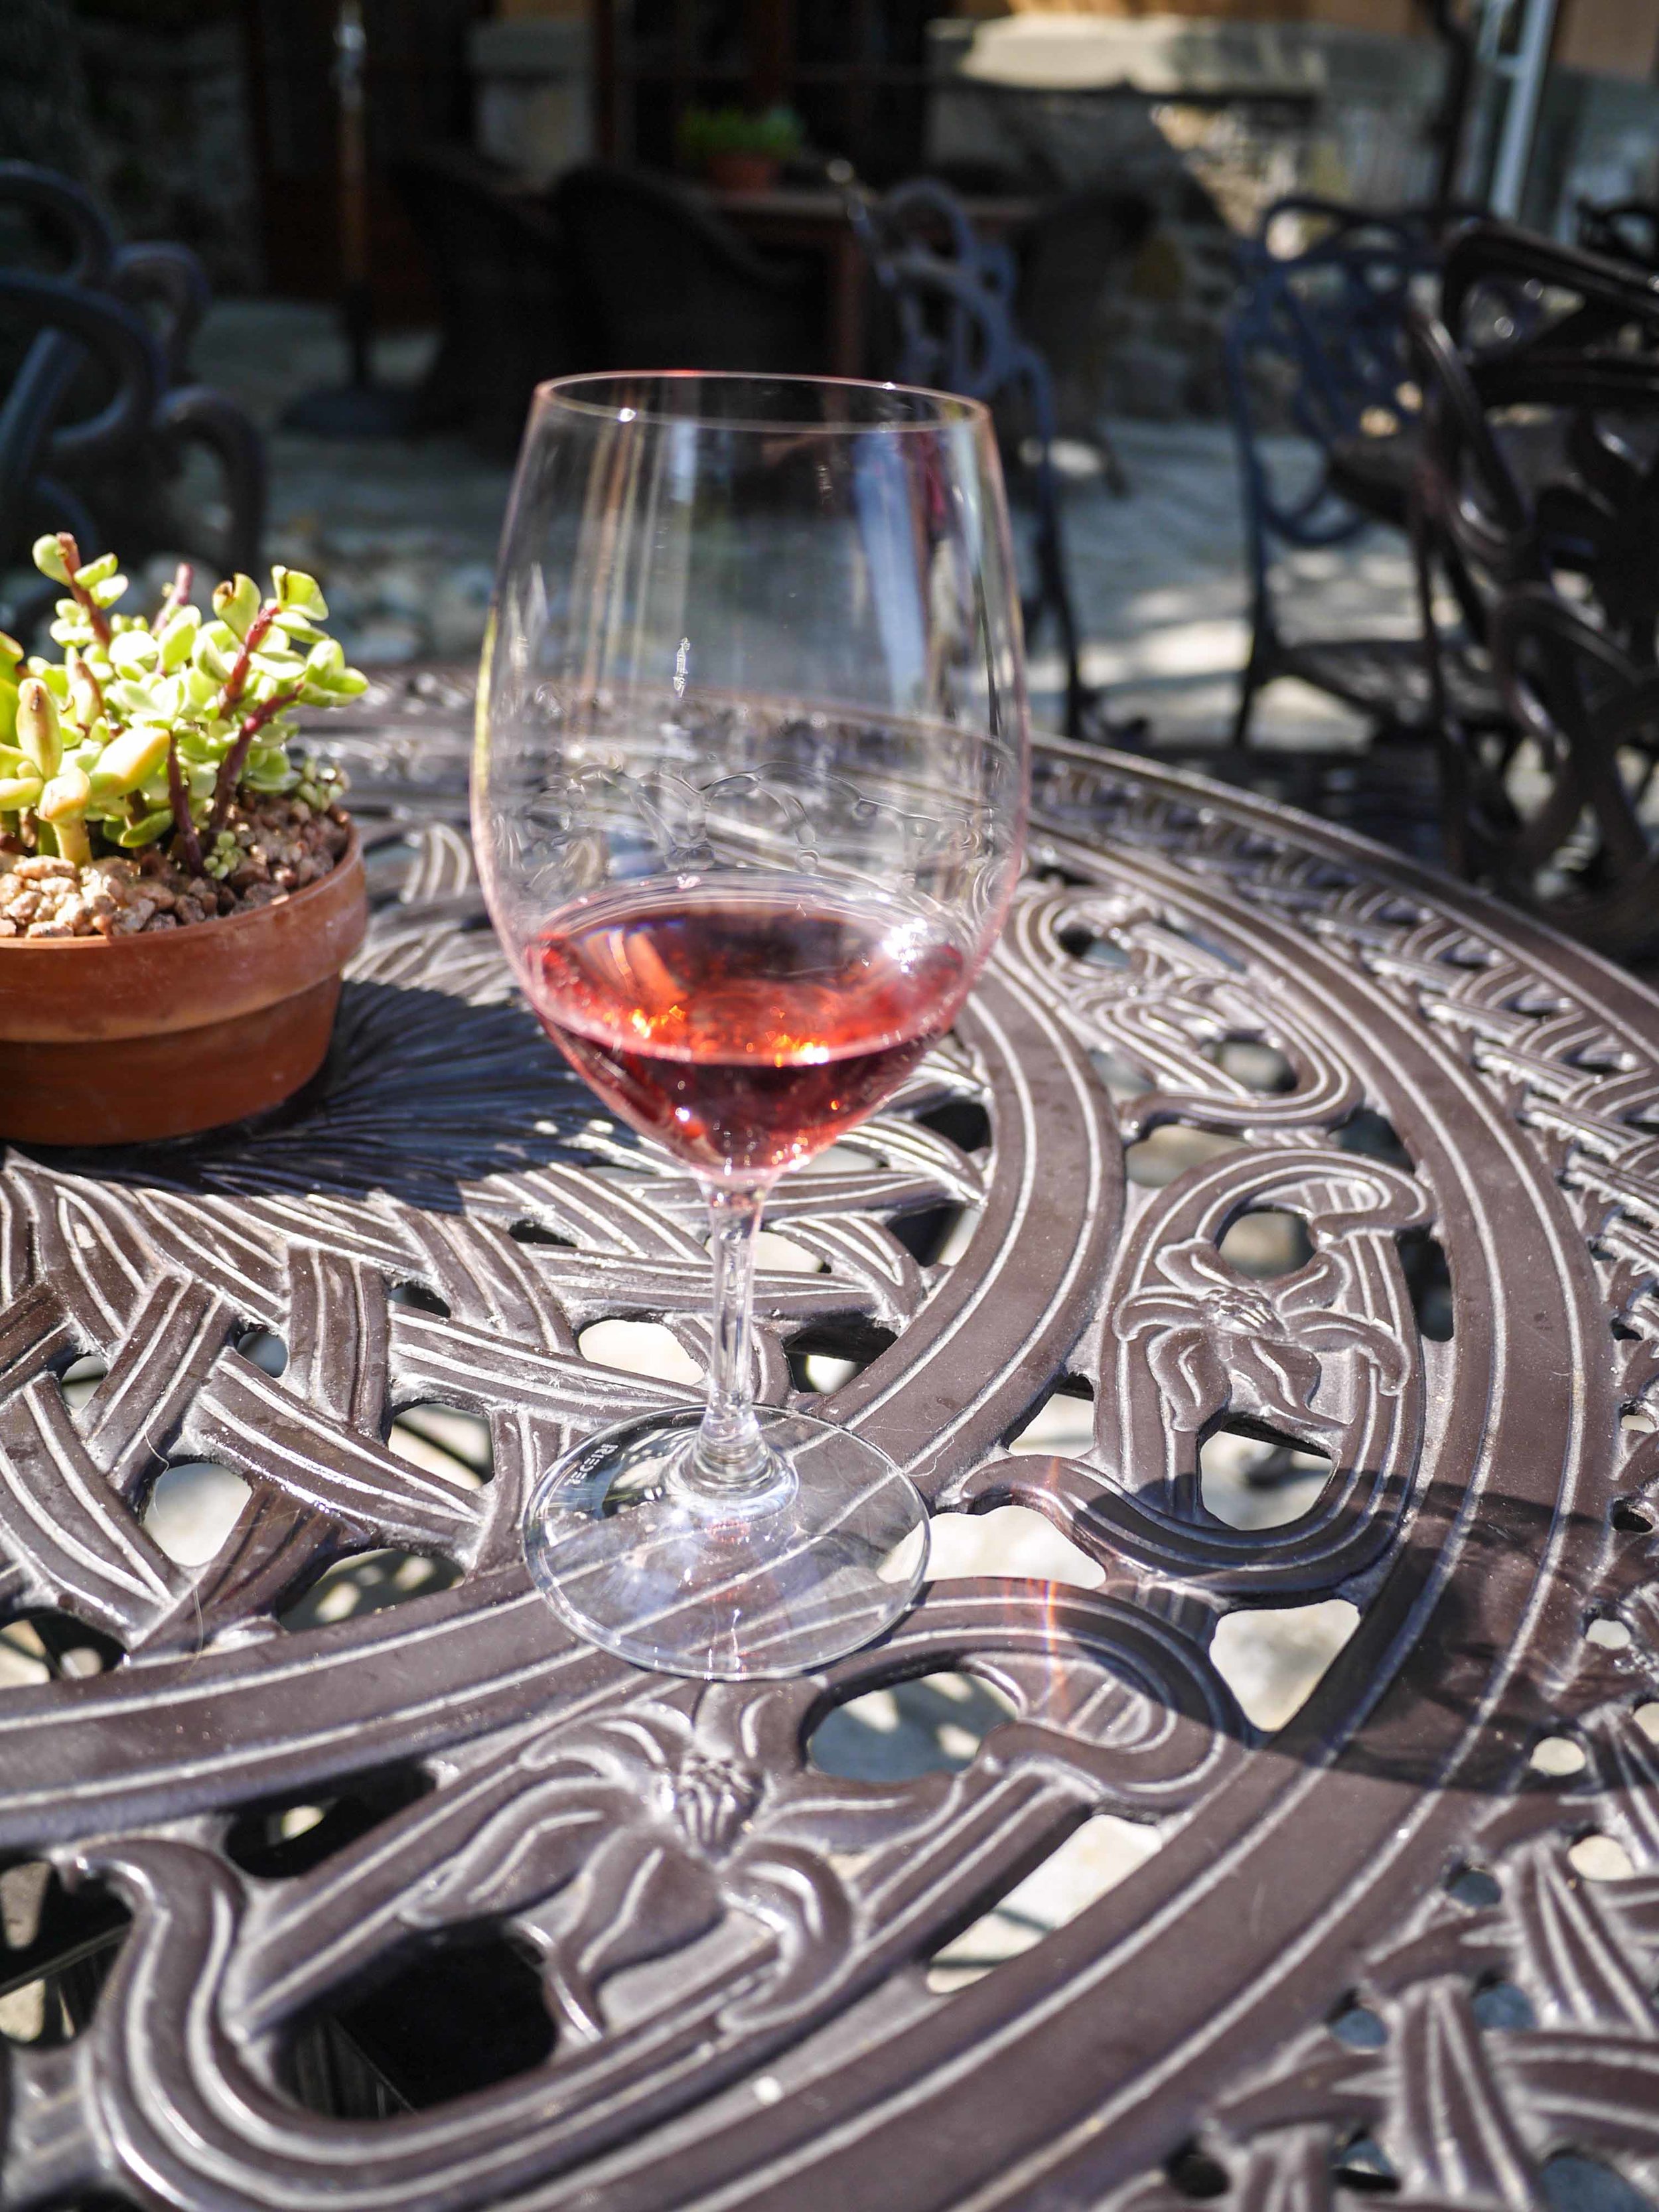 And some red was sipped on their beautiful patio.